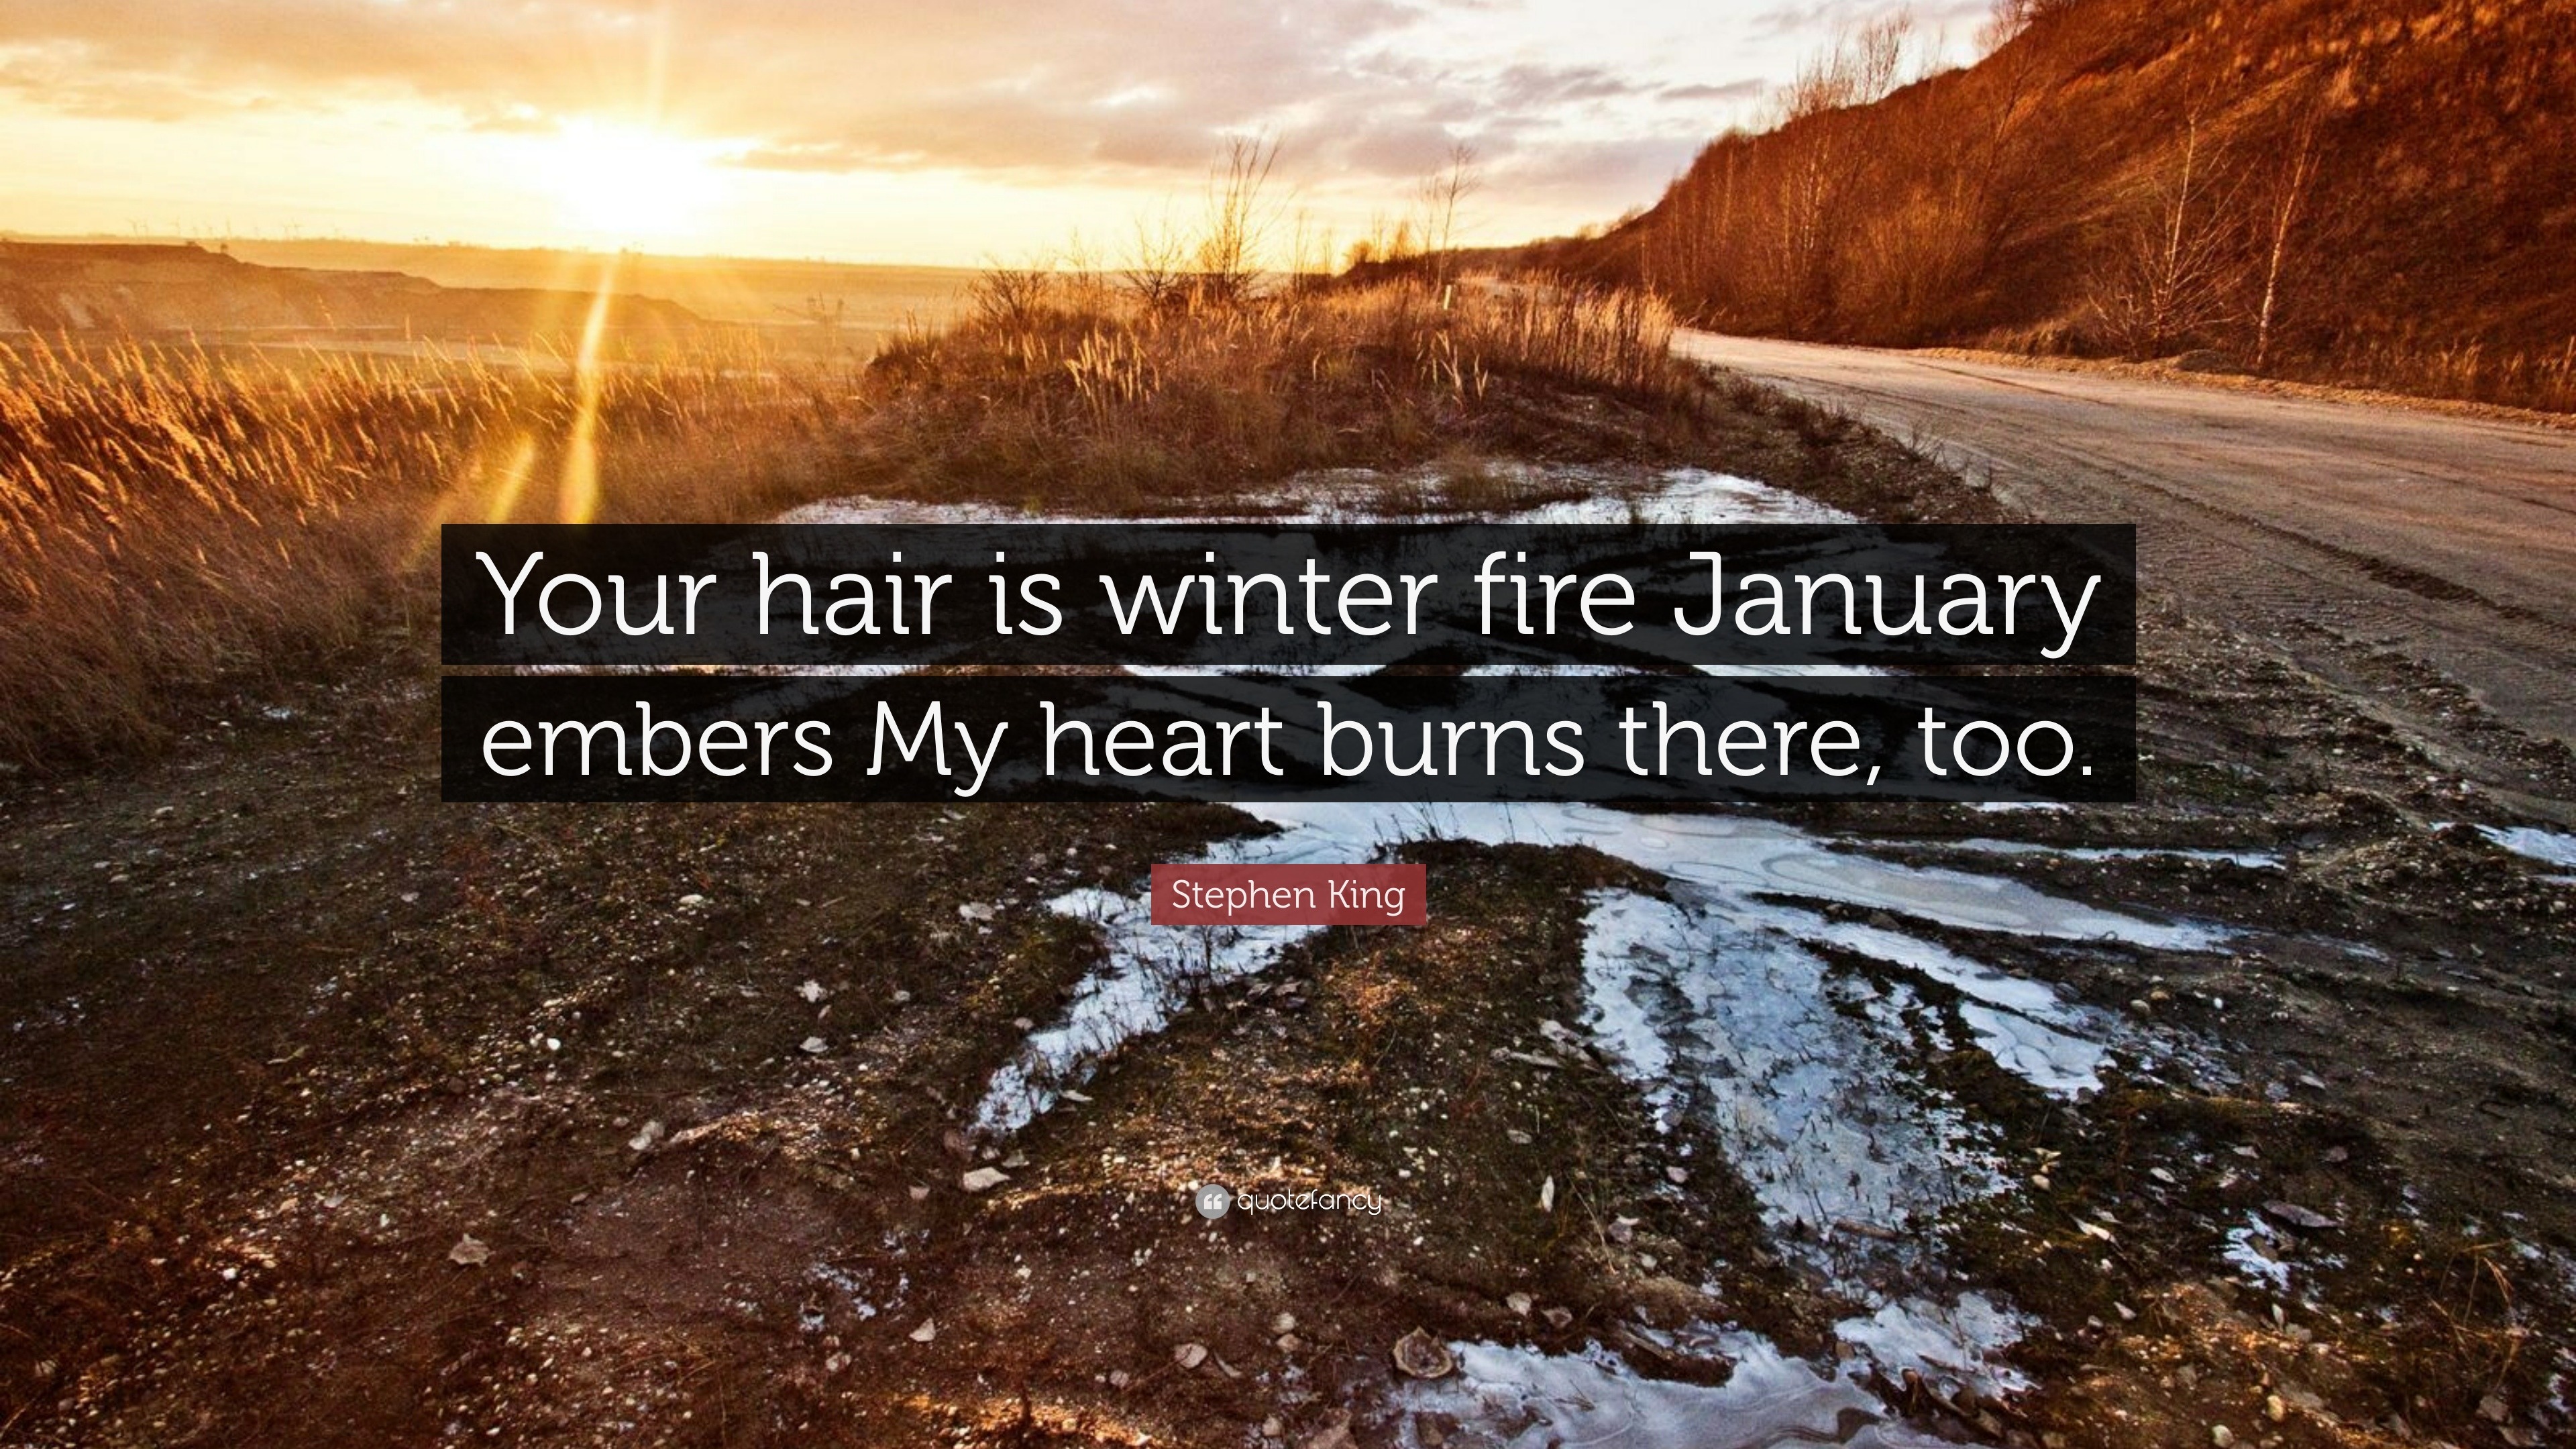 Stephen King Quote: “Your hair is winter fire January embers My heart burns  there, too.”